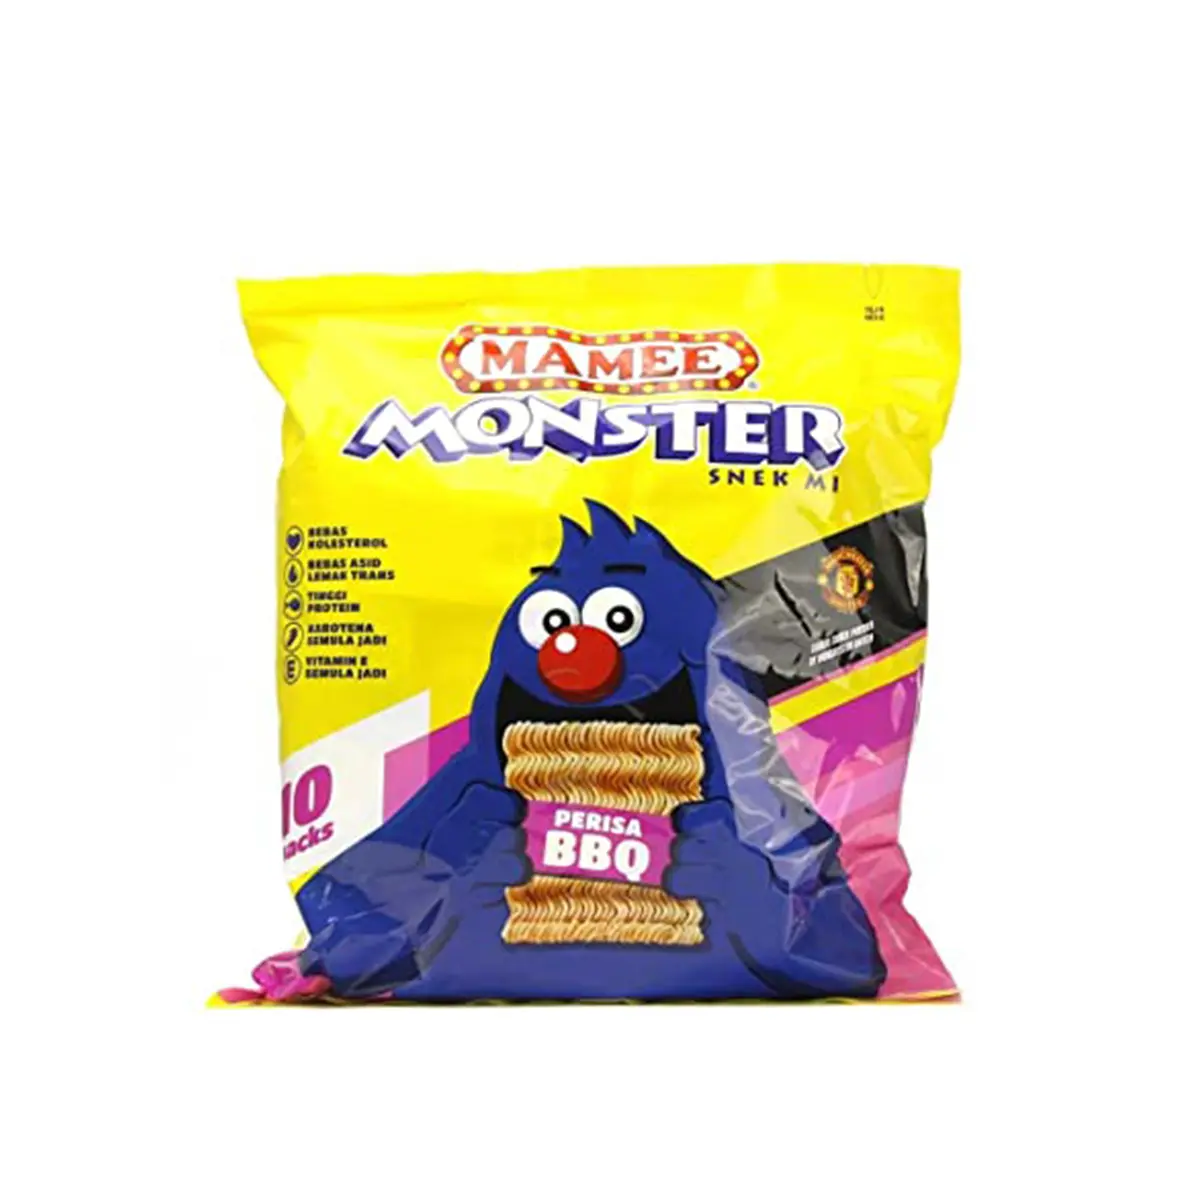 Mamee Monster Noodle Perisa Bbq Flv 25g*8